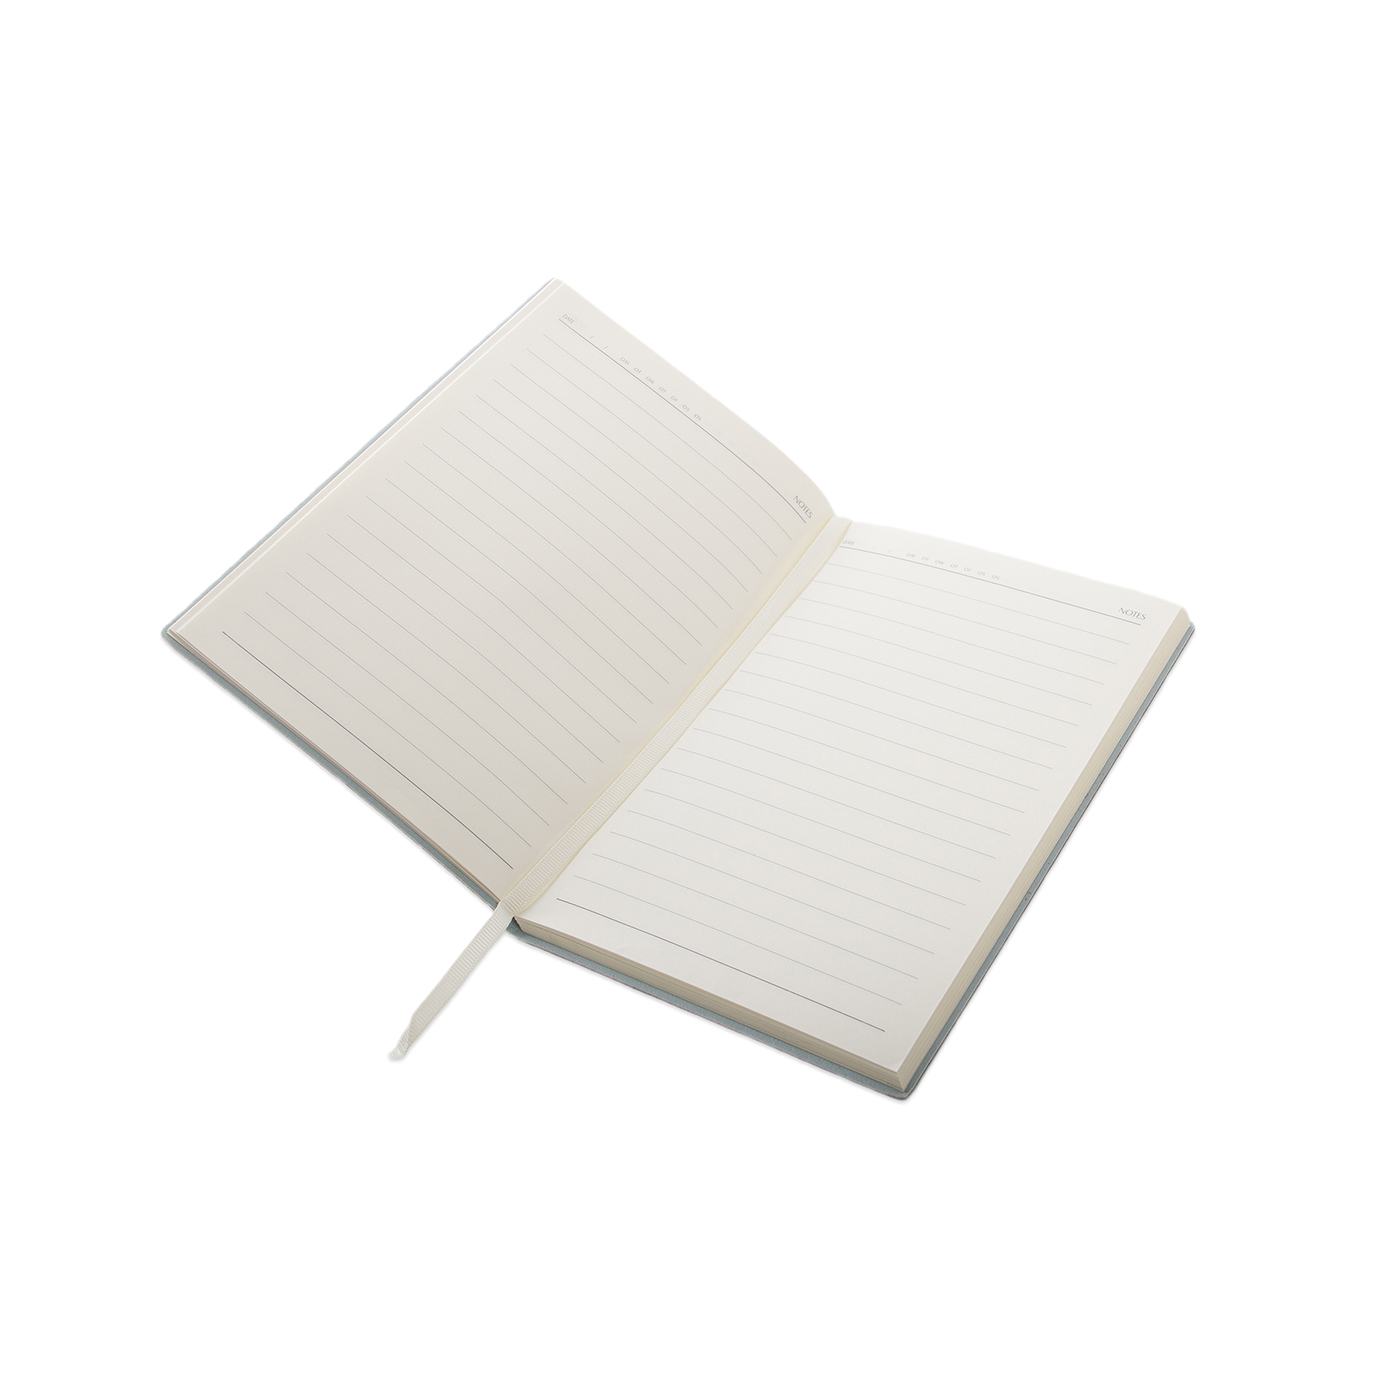 A5 Soft Cover PU Leather Notebook3